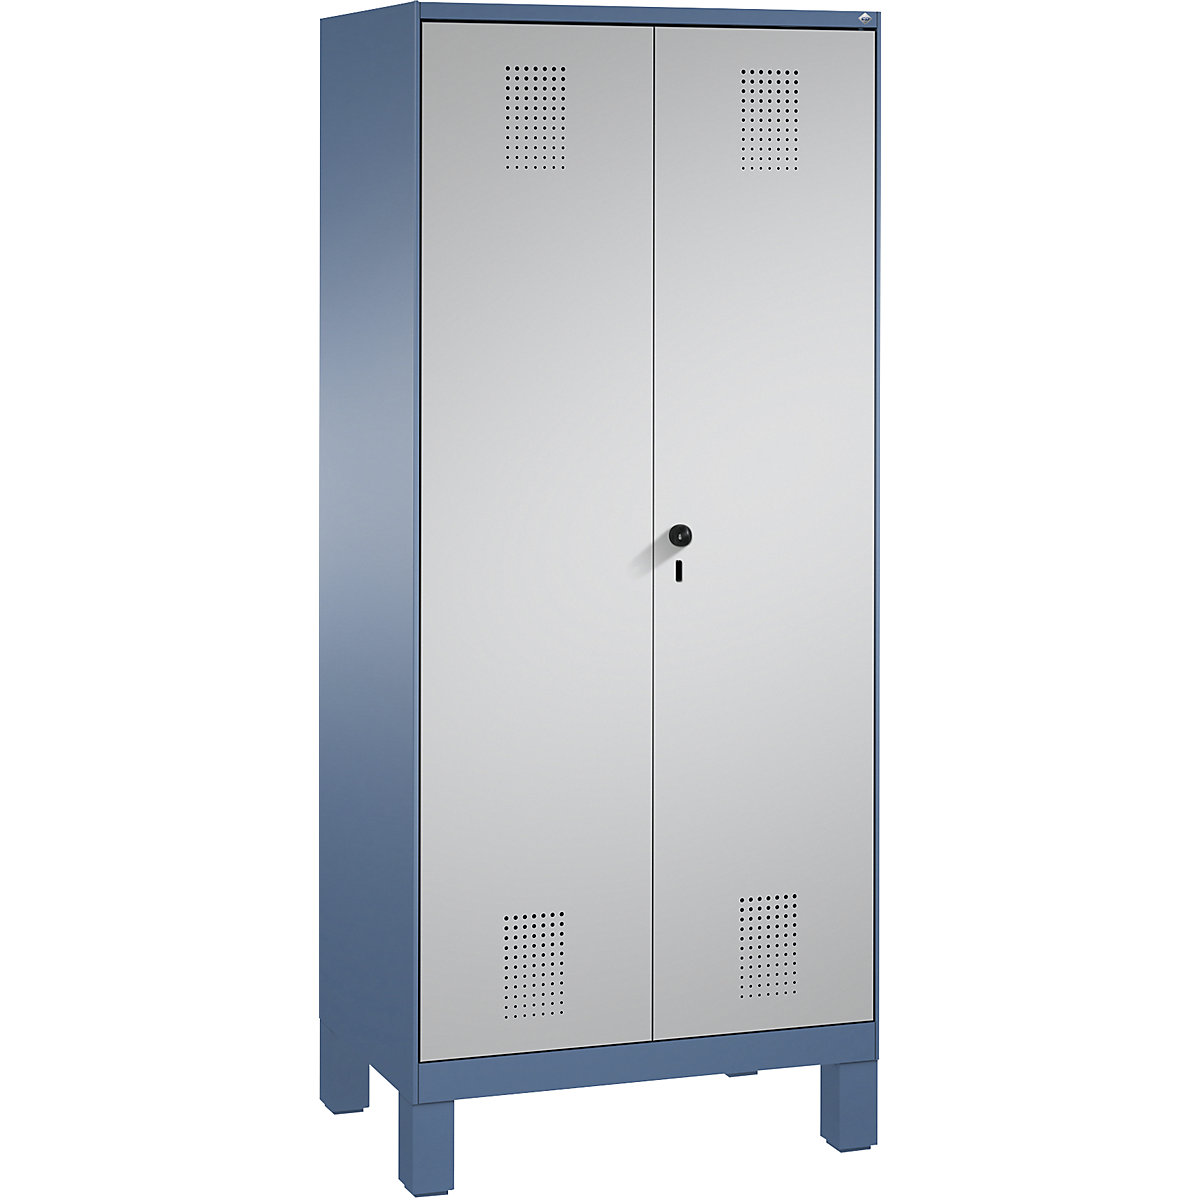 EVOLO cloakroom locker, doors close in the middle – C+P, 2 compartments, compartment width 400 mm, with feet, distant blue / white aluminium-12